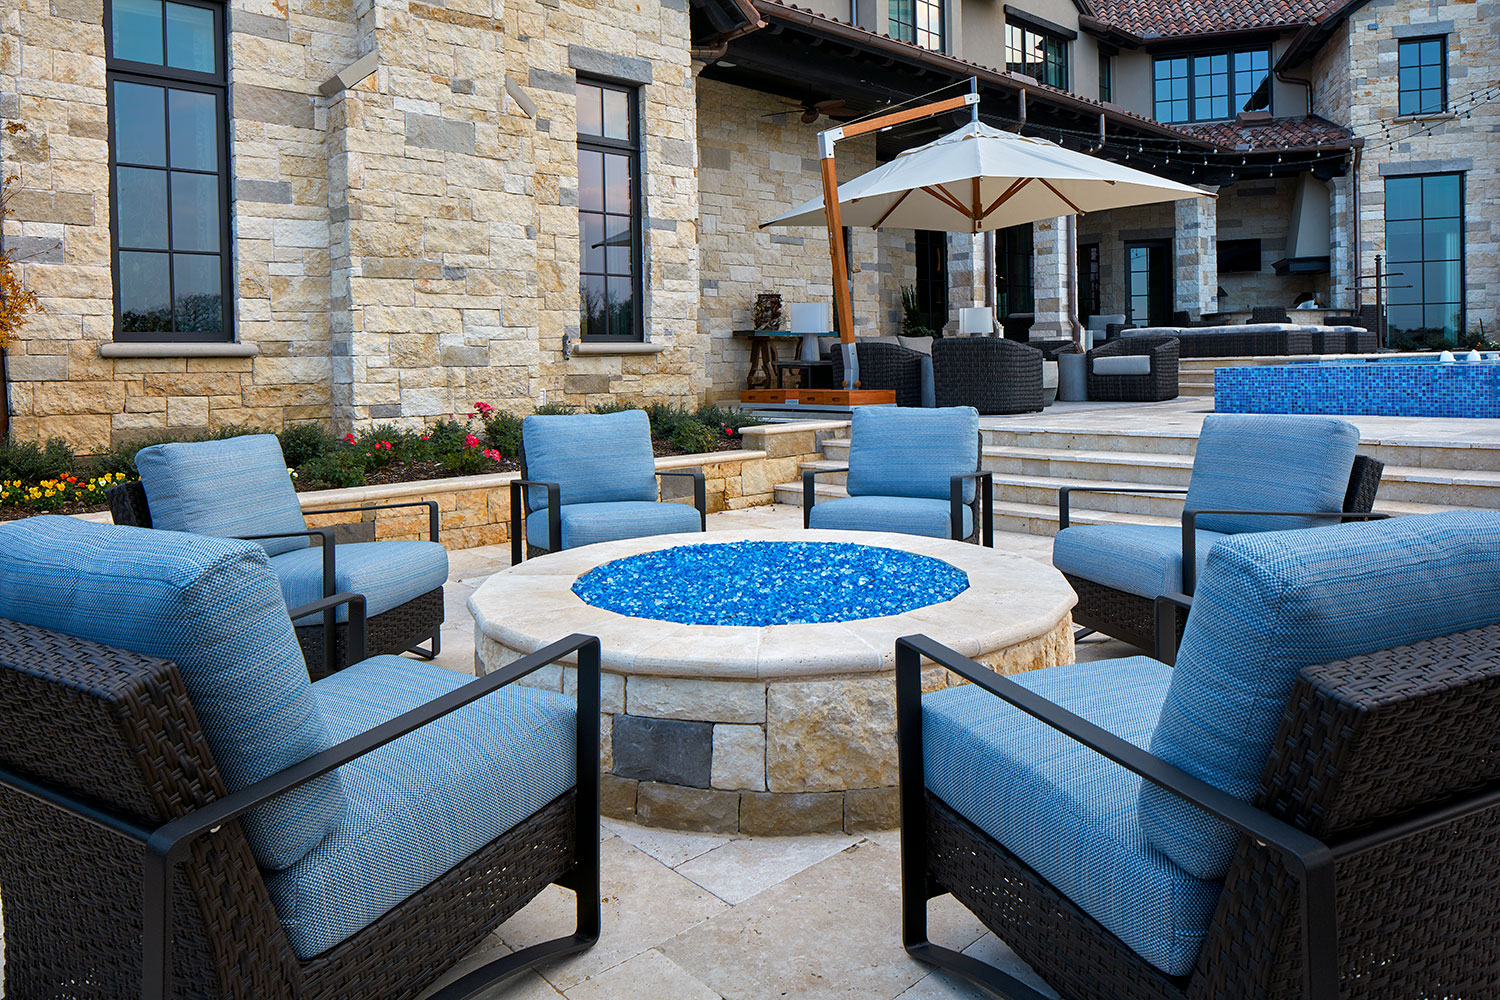 Firepit With Blue Rock And Chairs, Blue Rock Fire Pit